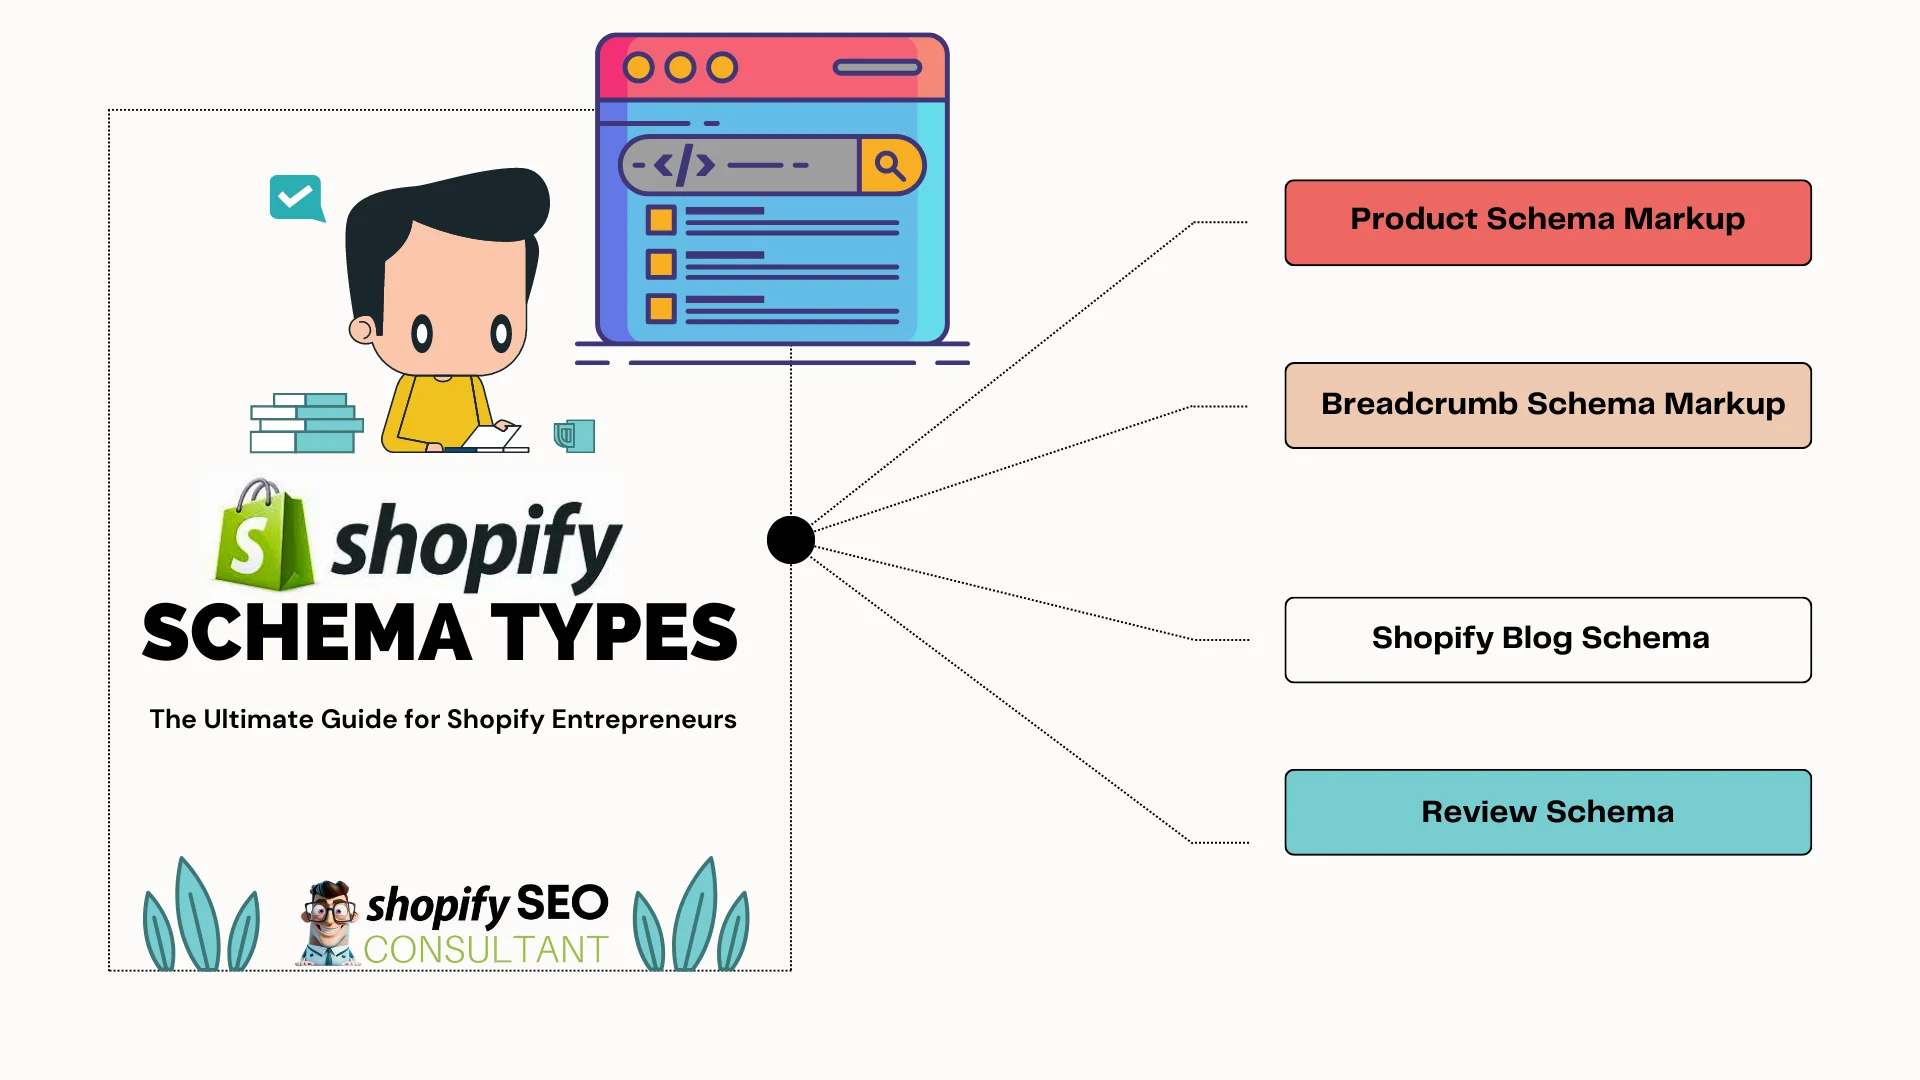 Shopify Schema Types for Storefronts